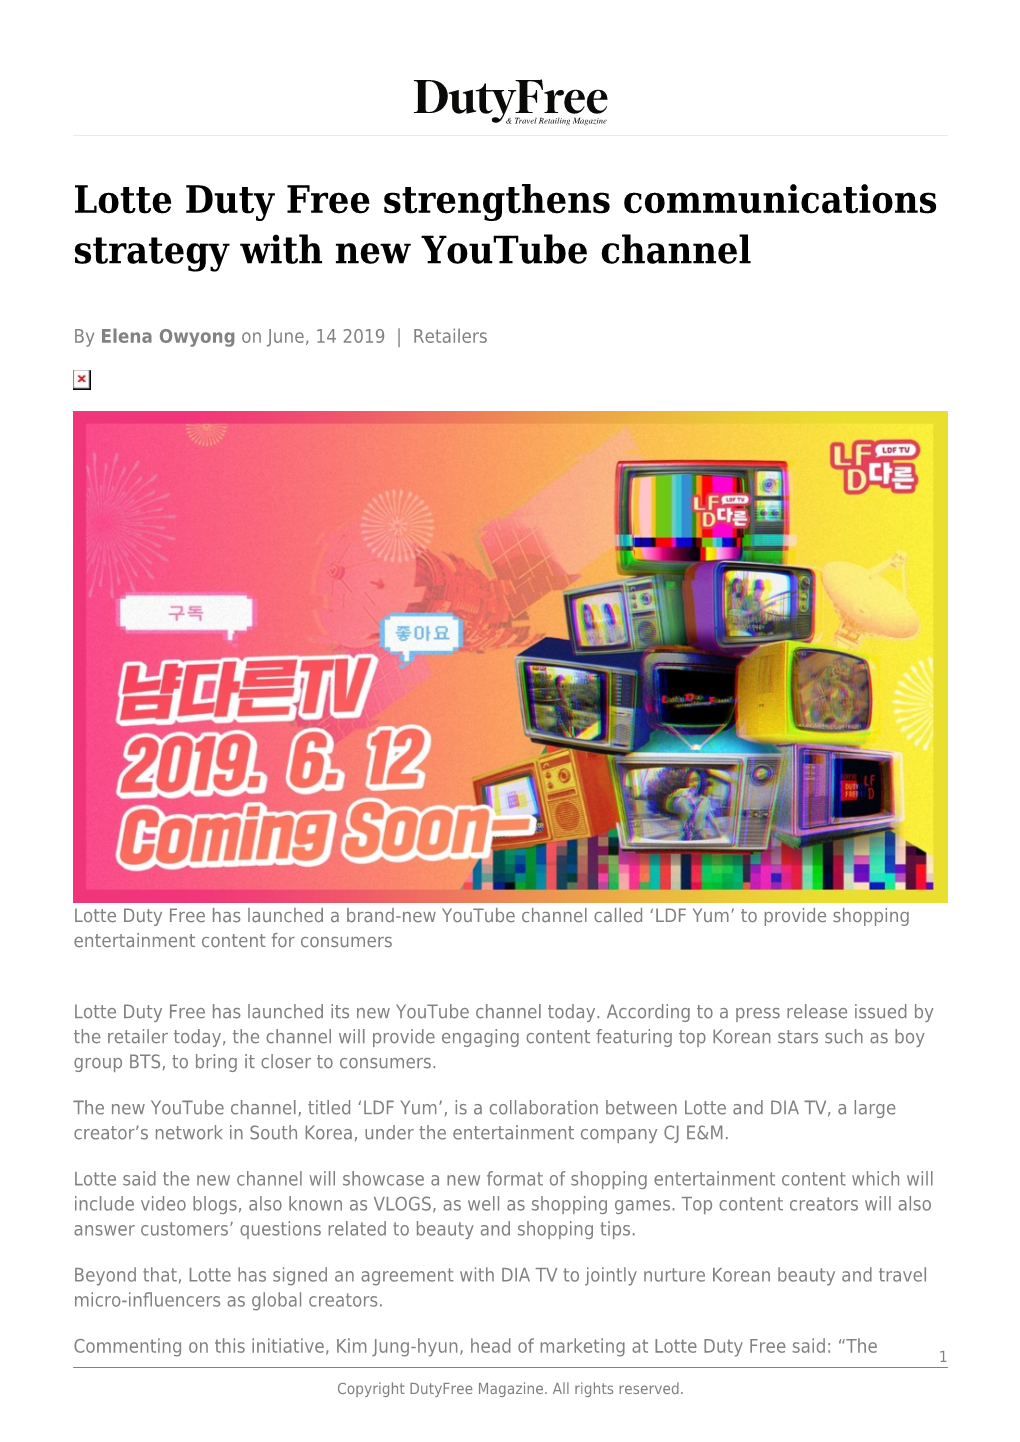 Lotte Duty Free Strengthens Communications Strategy with New Youtube Channel